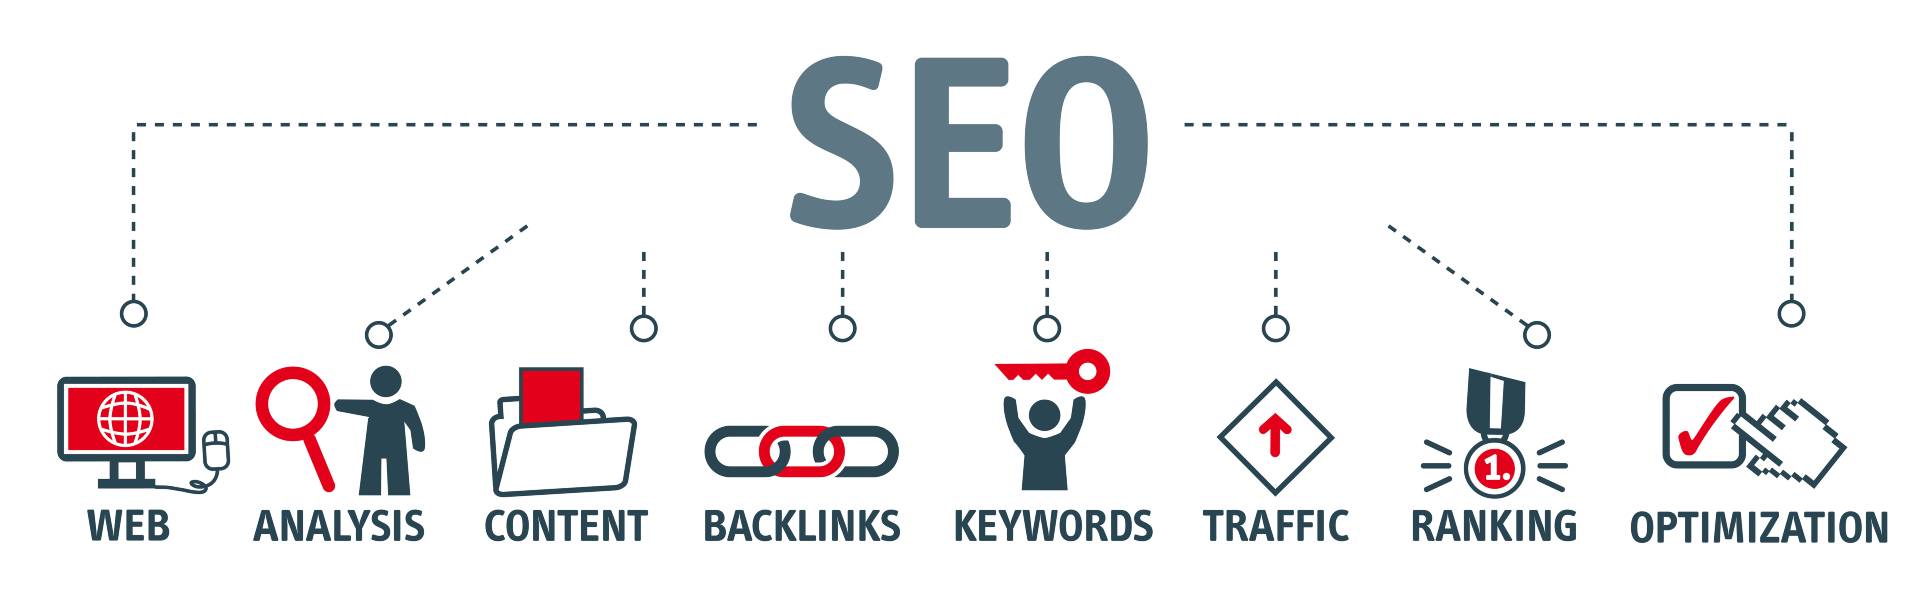 what is onsite seo?